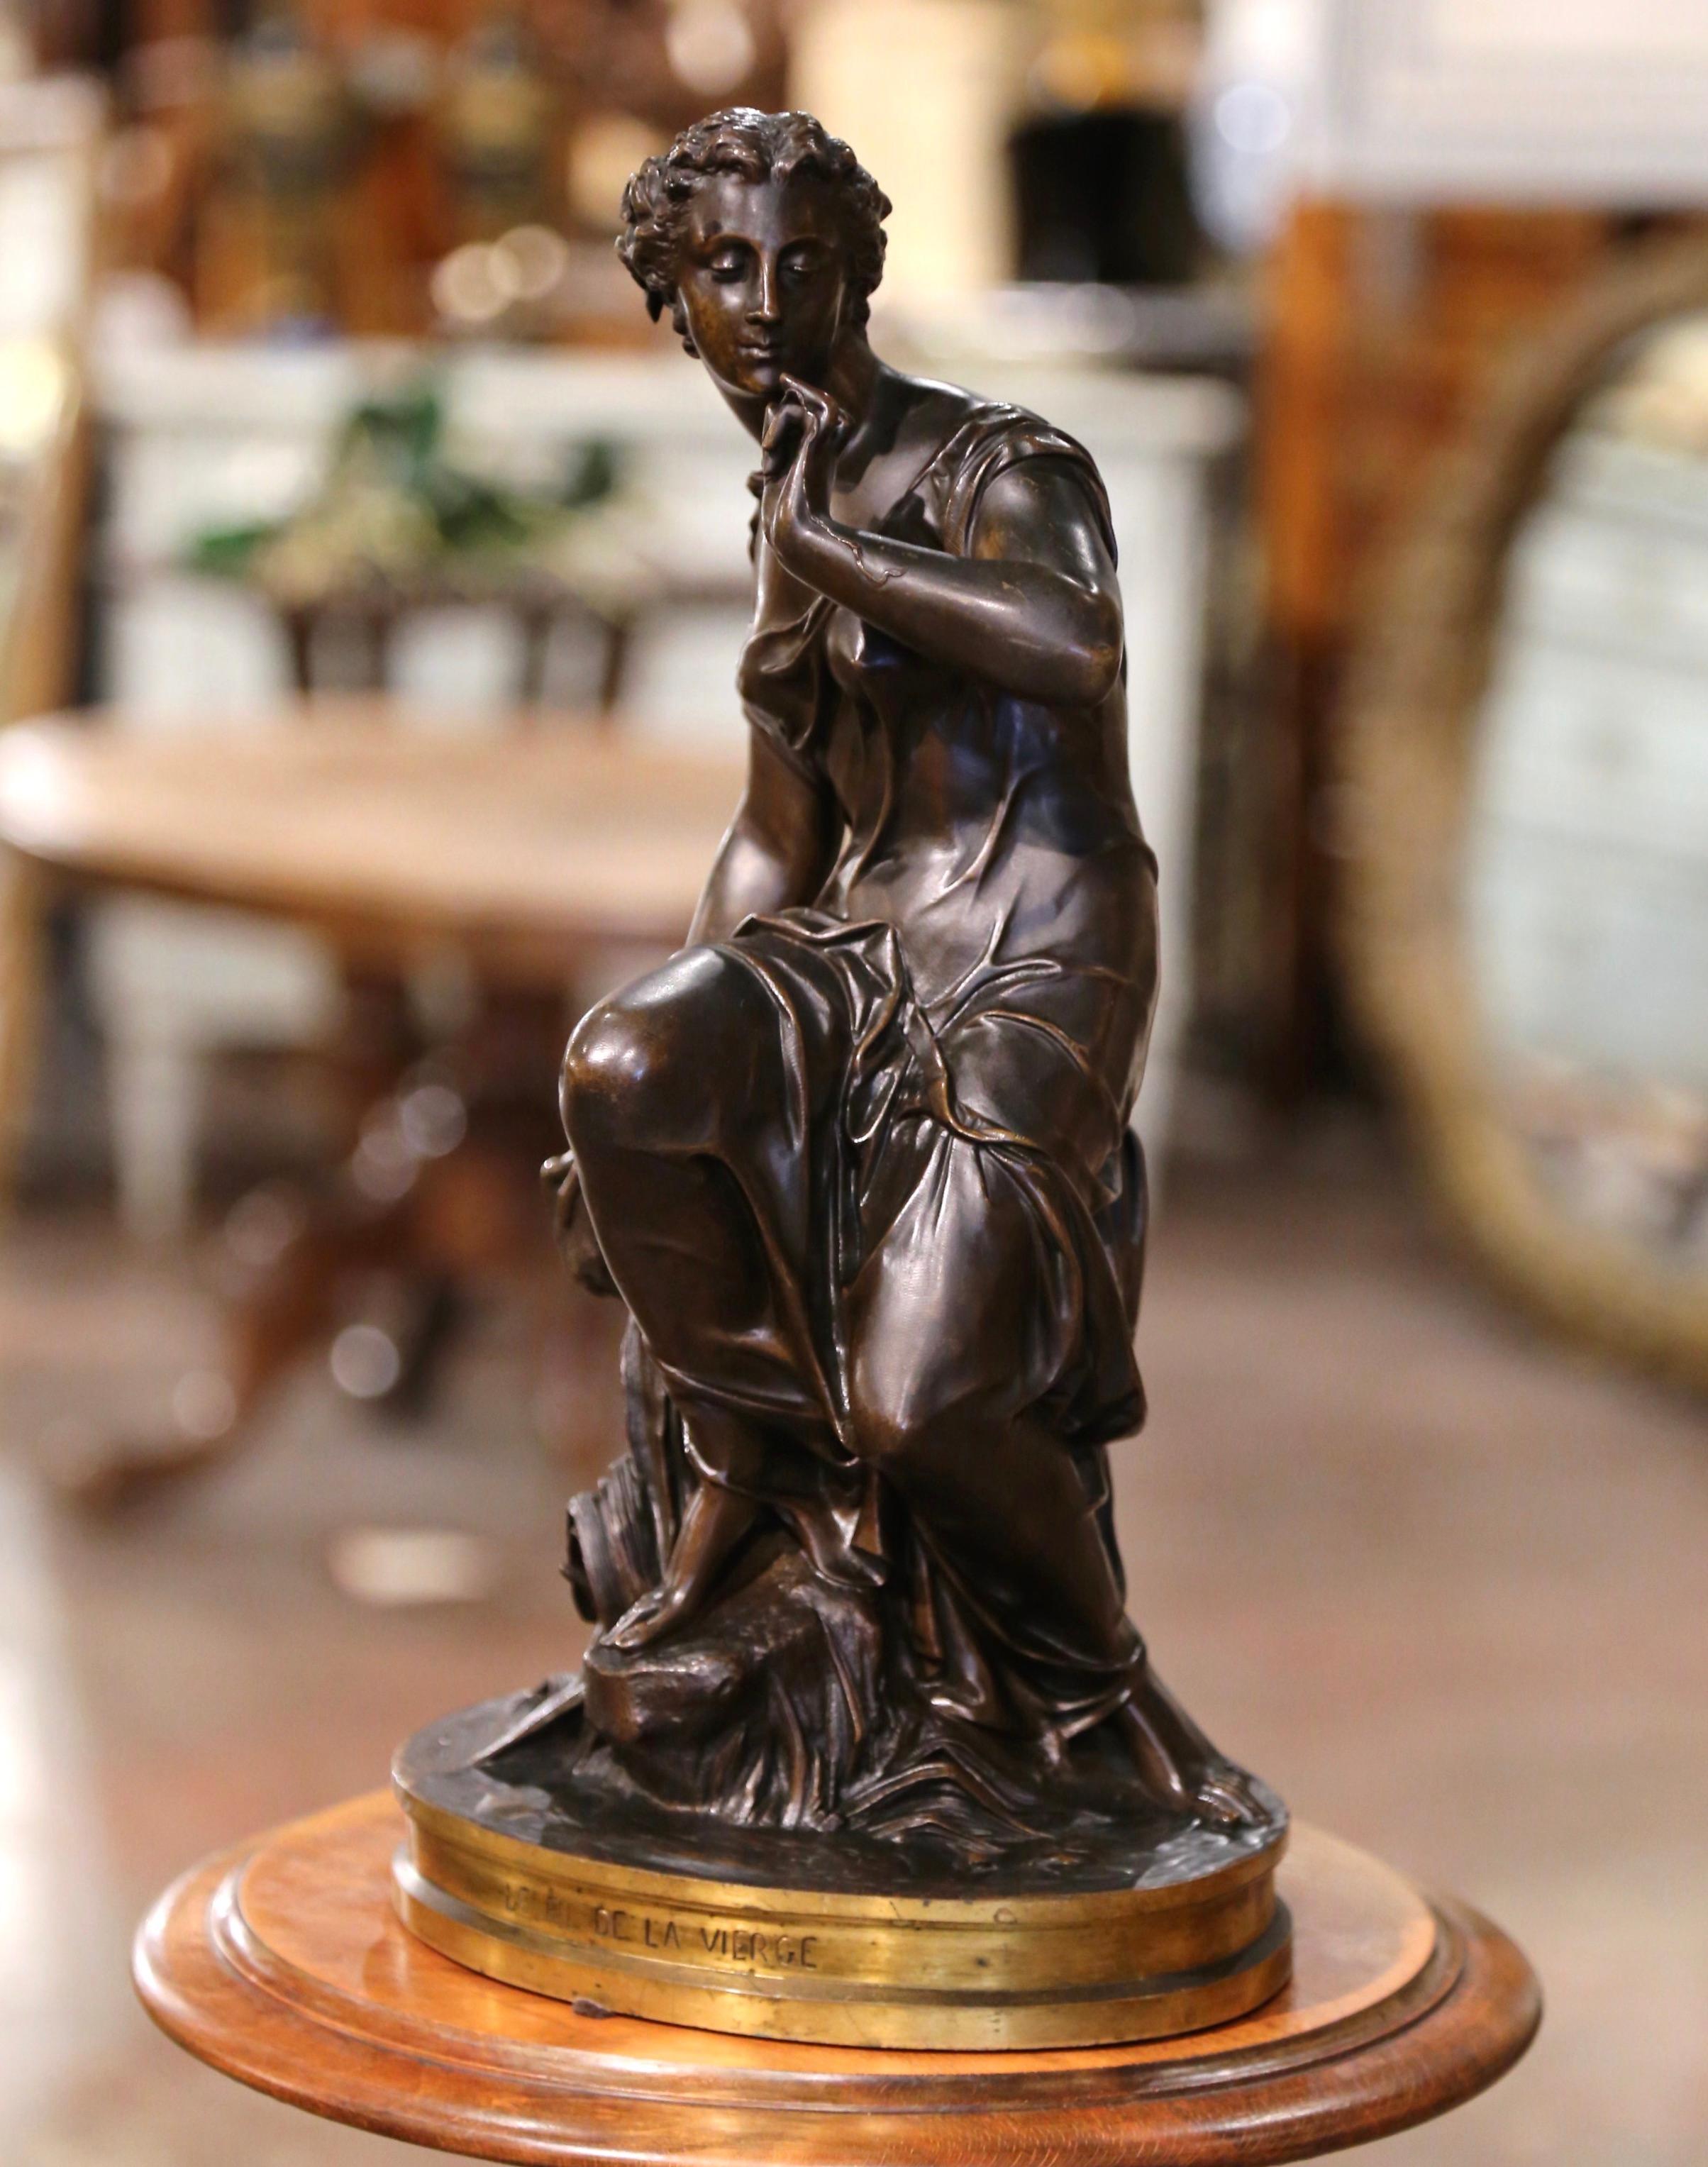 Decorate an office or a study or an office with this elegant antique bronze woman figure. Hand crafted in France circa 1870, and titled 